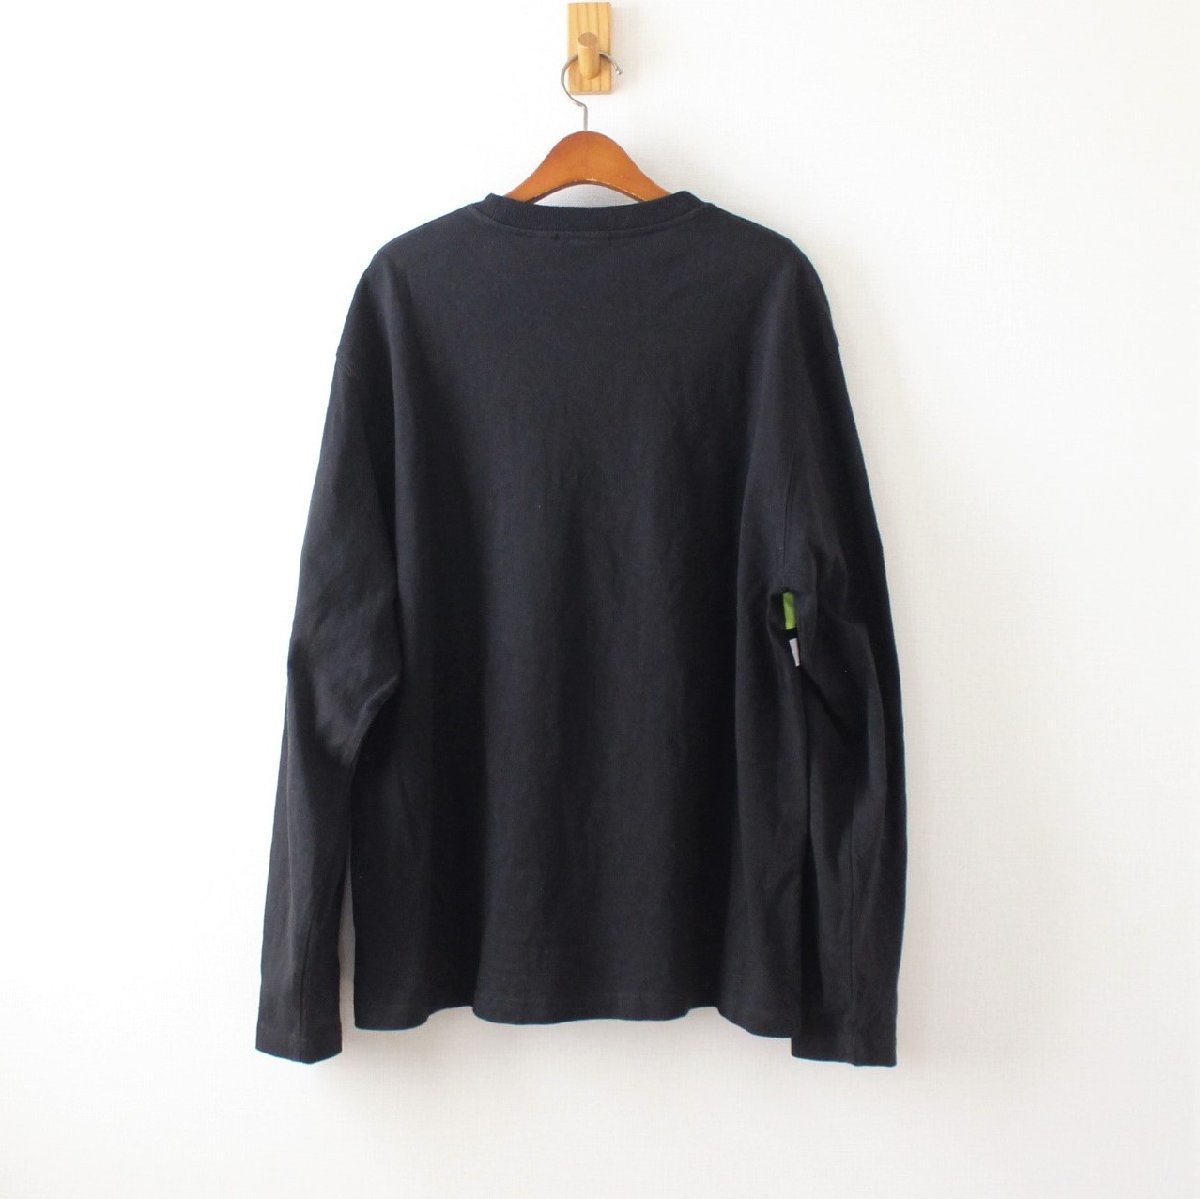 stussy Stussy long sleeve T shirt COLOR BLOCK L/S CREW made in China black M (w-1321019)